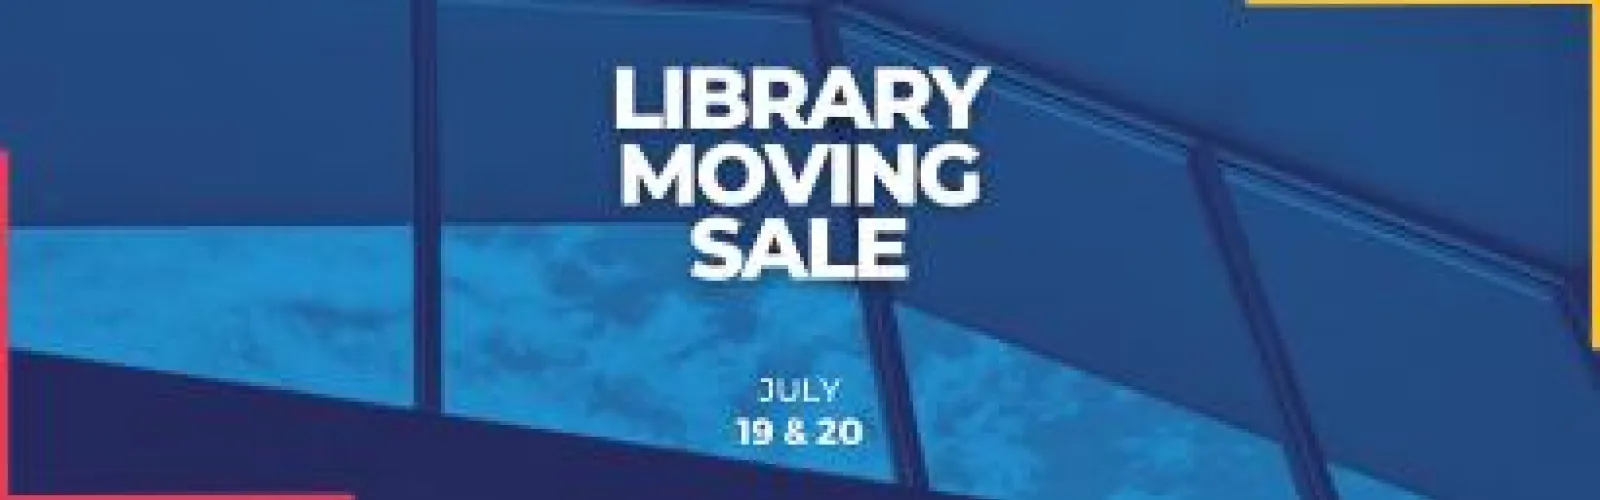 library moving sale July 19th and 20th